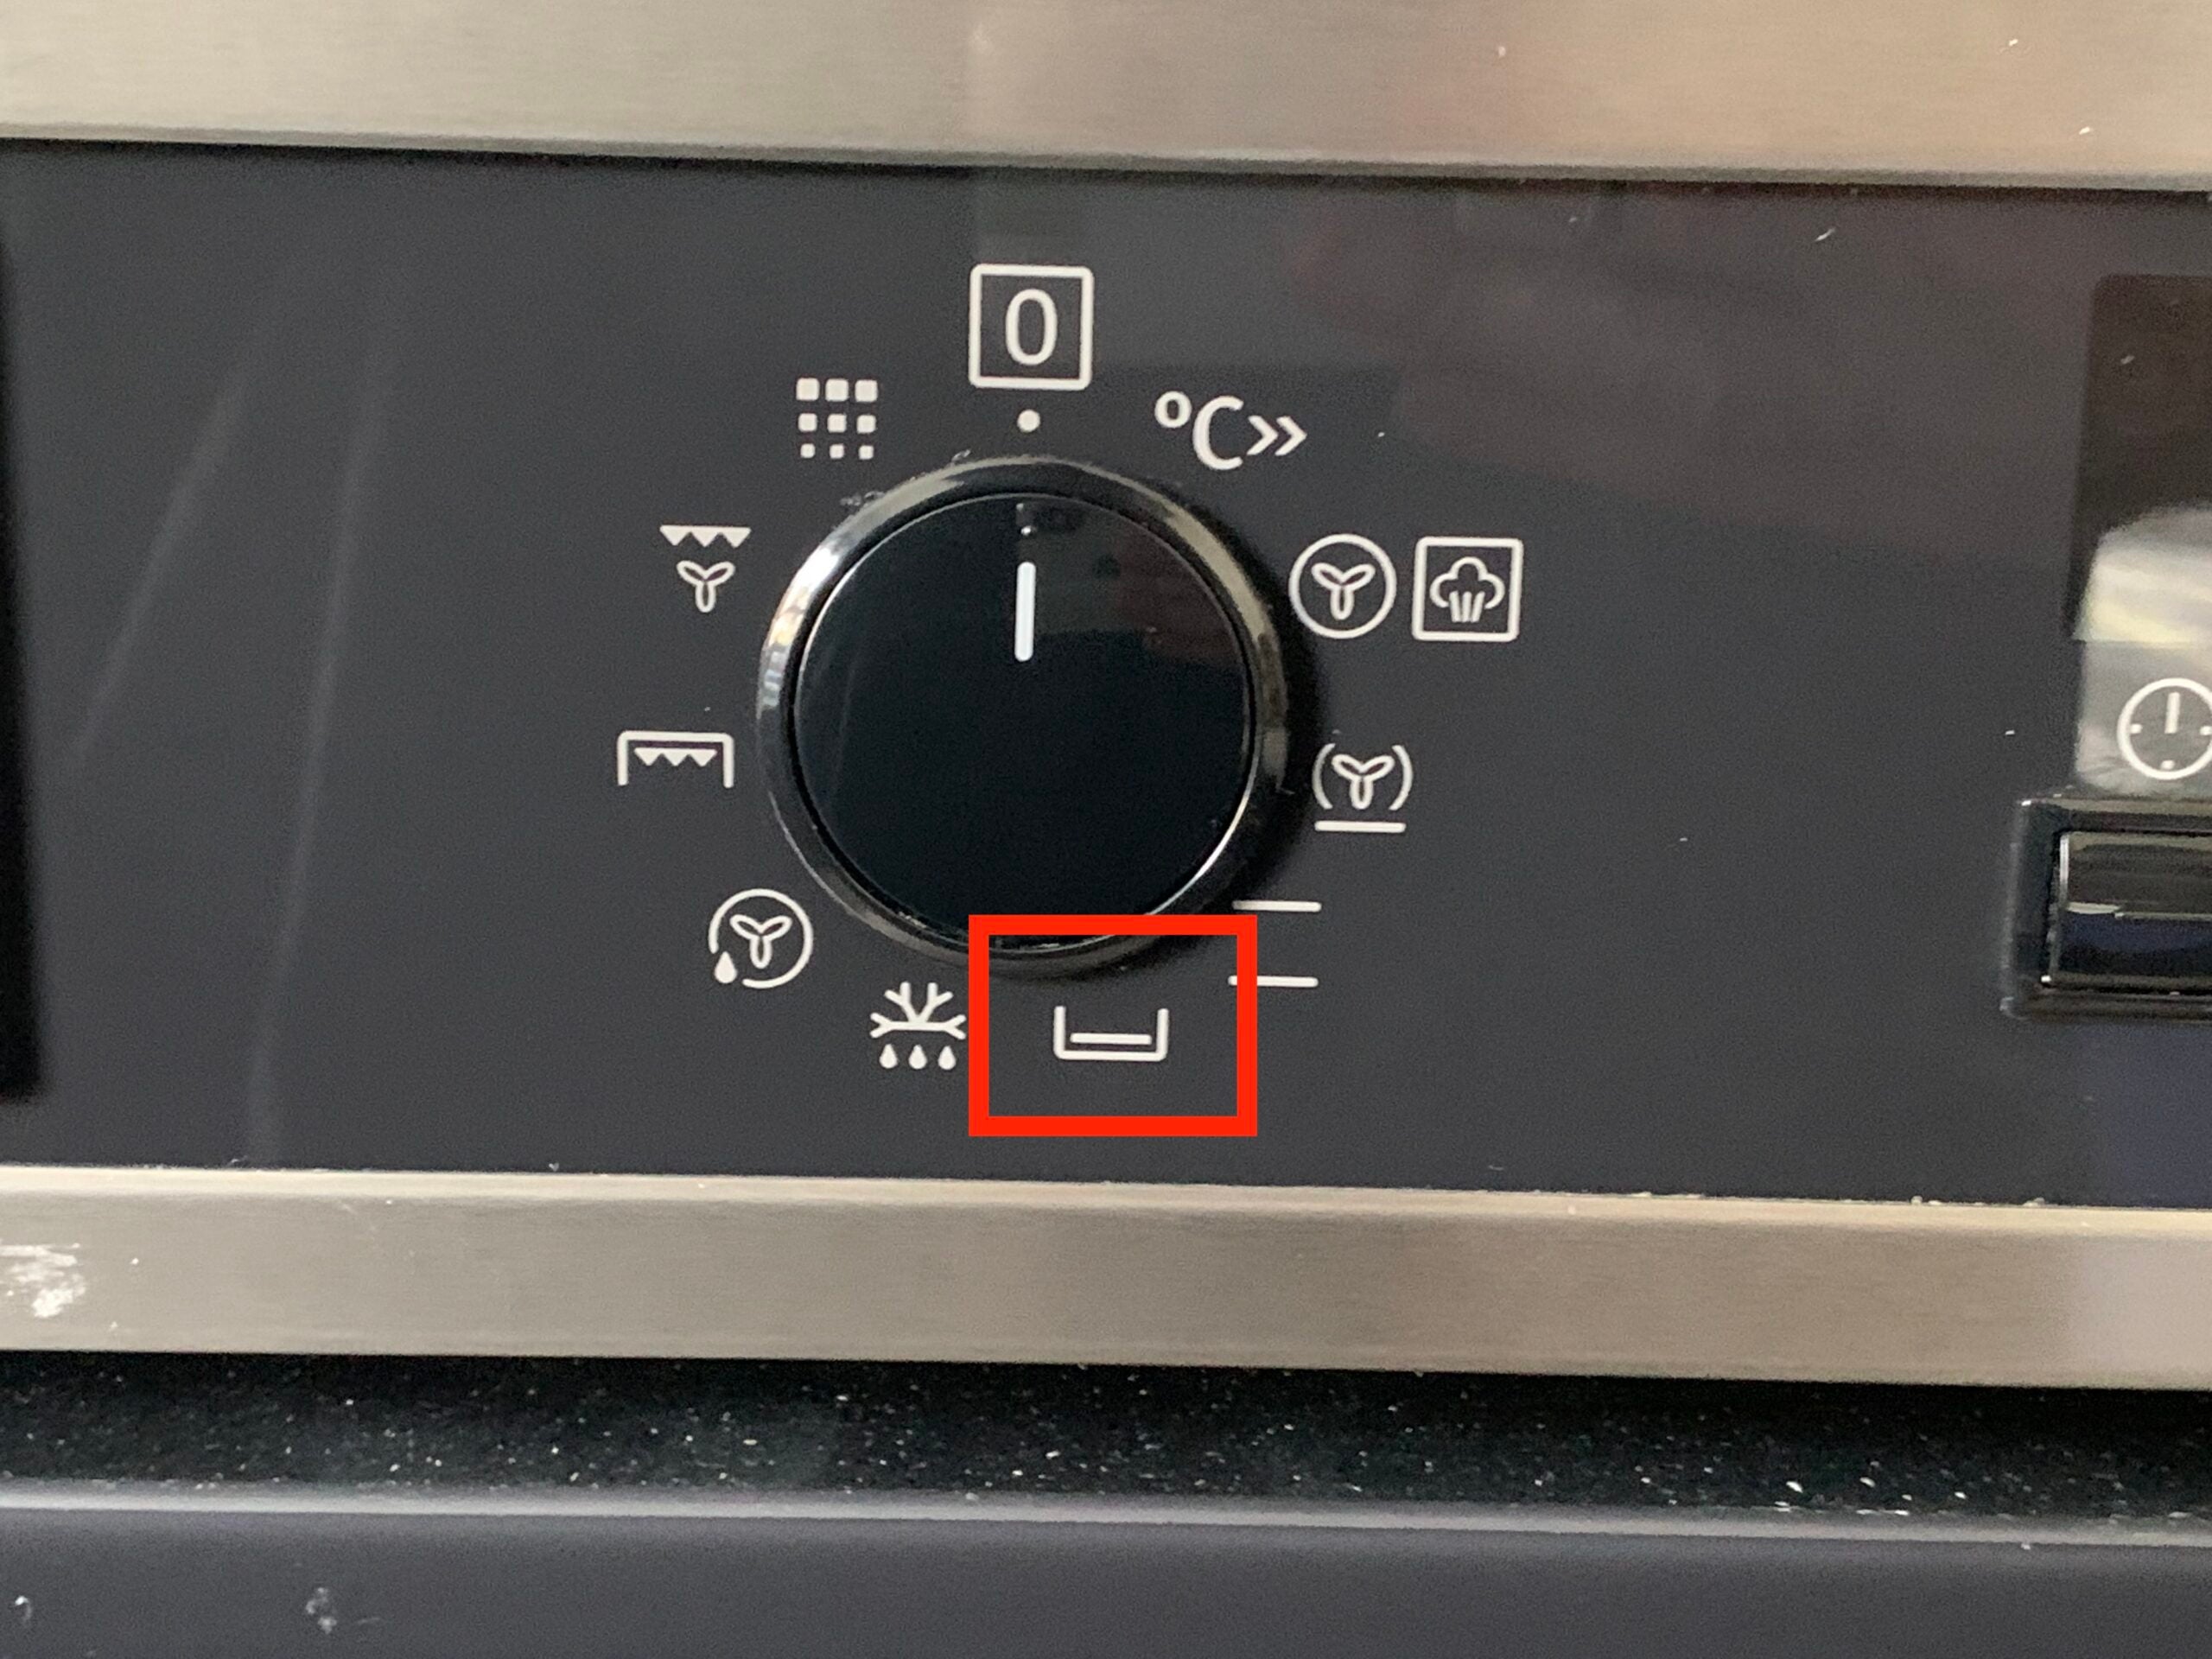 The bottom heat only setting